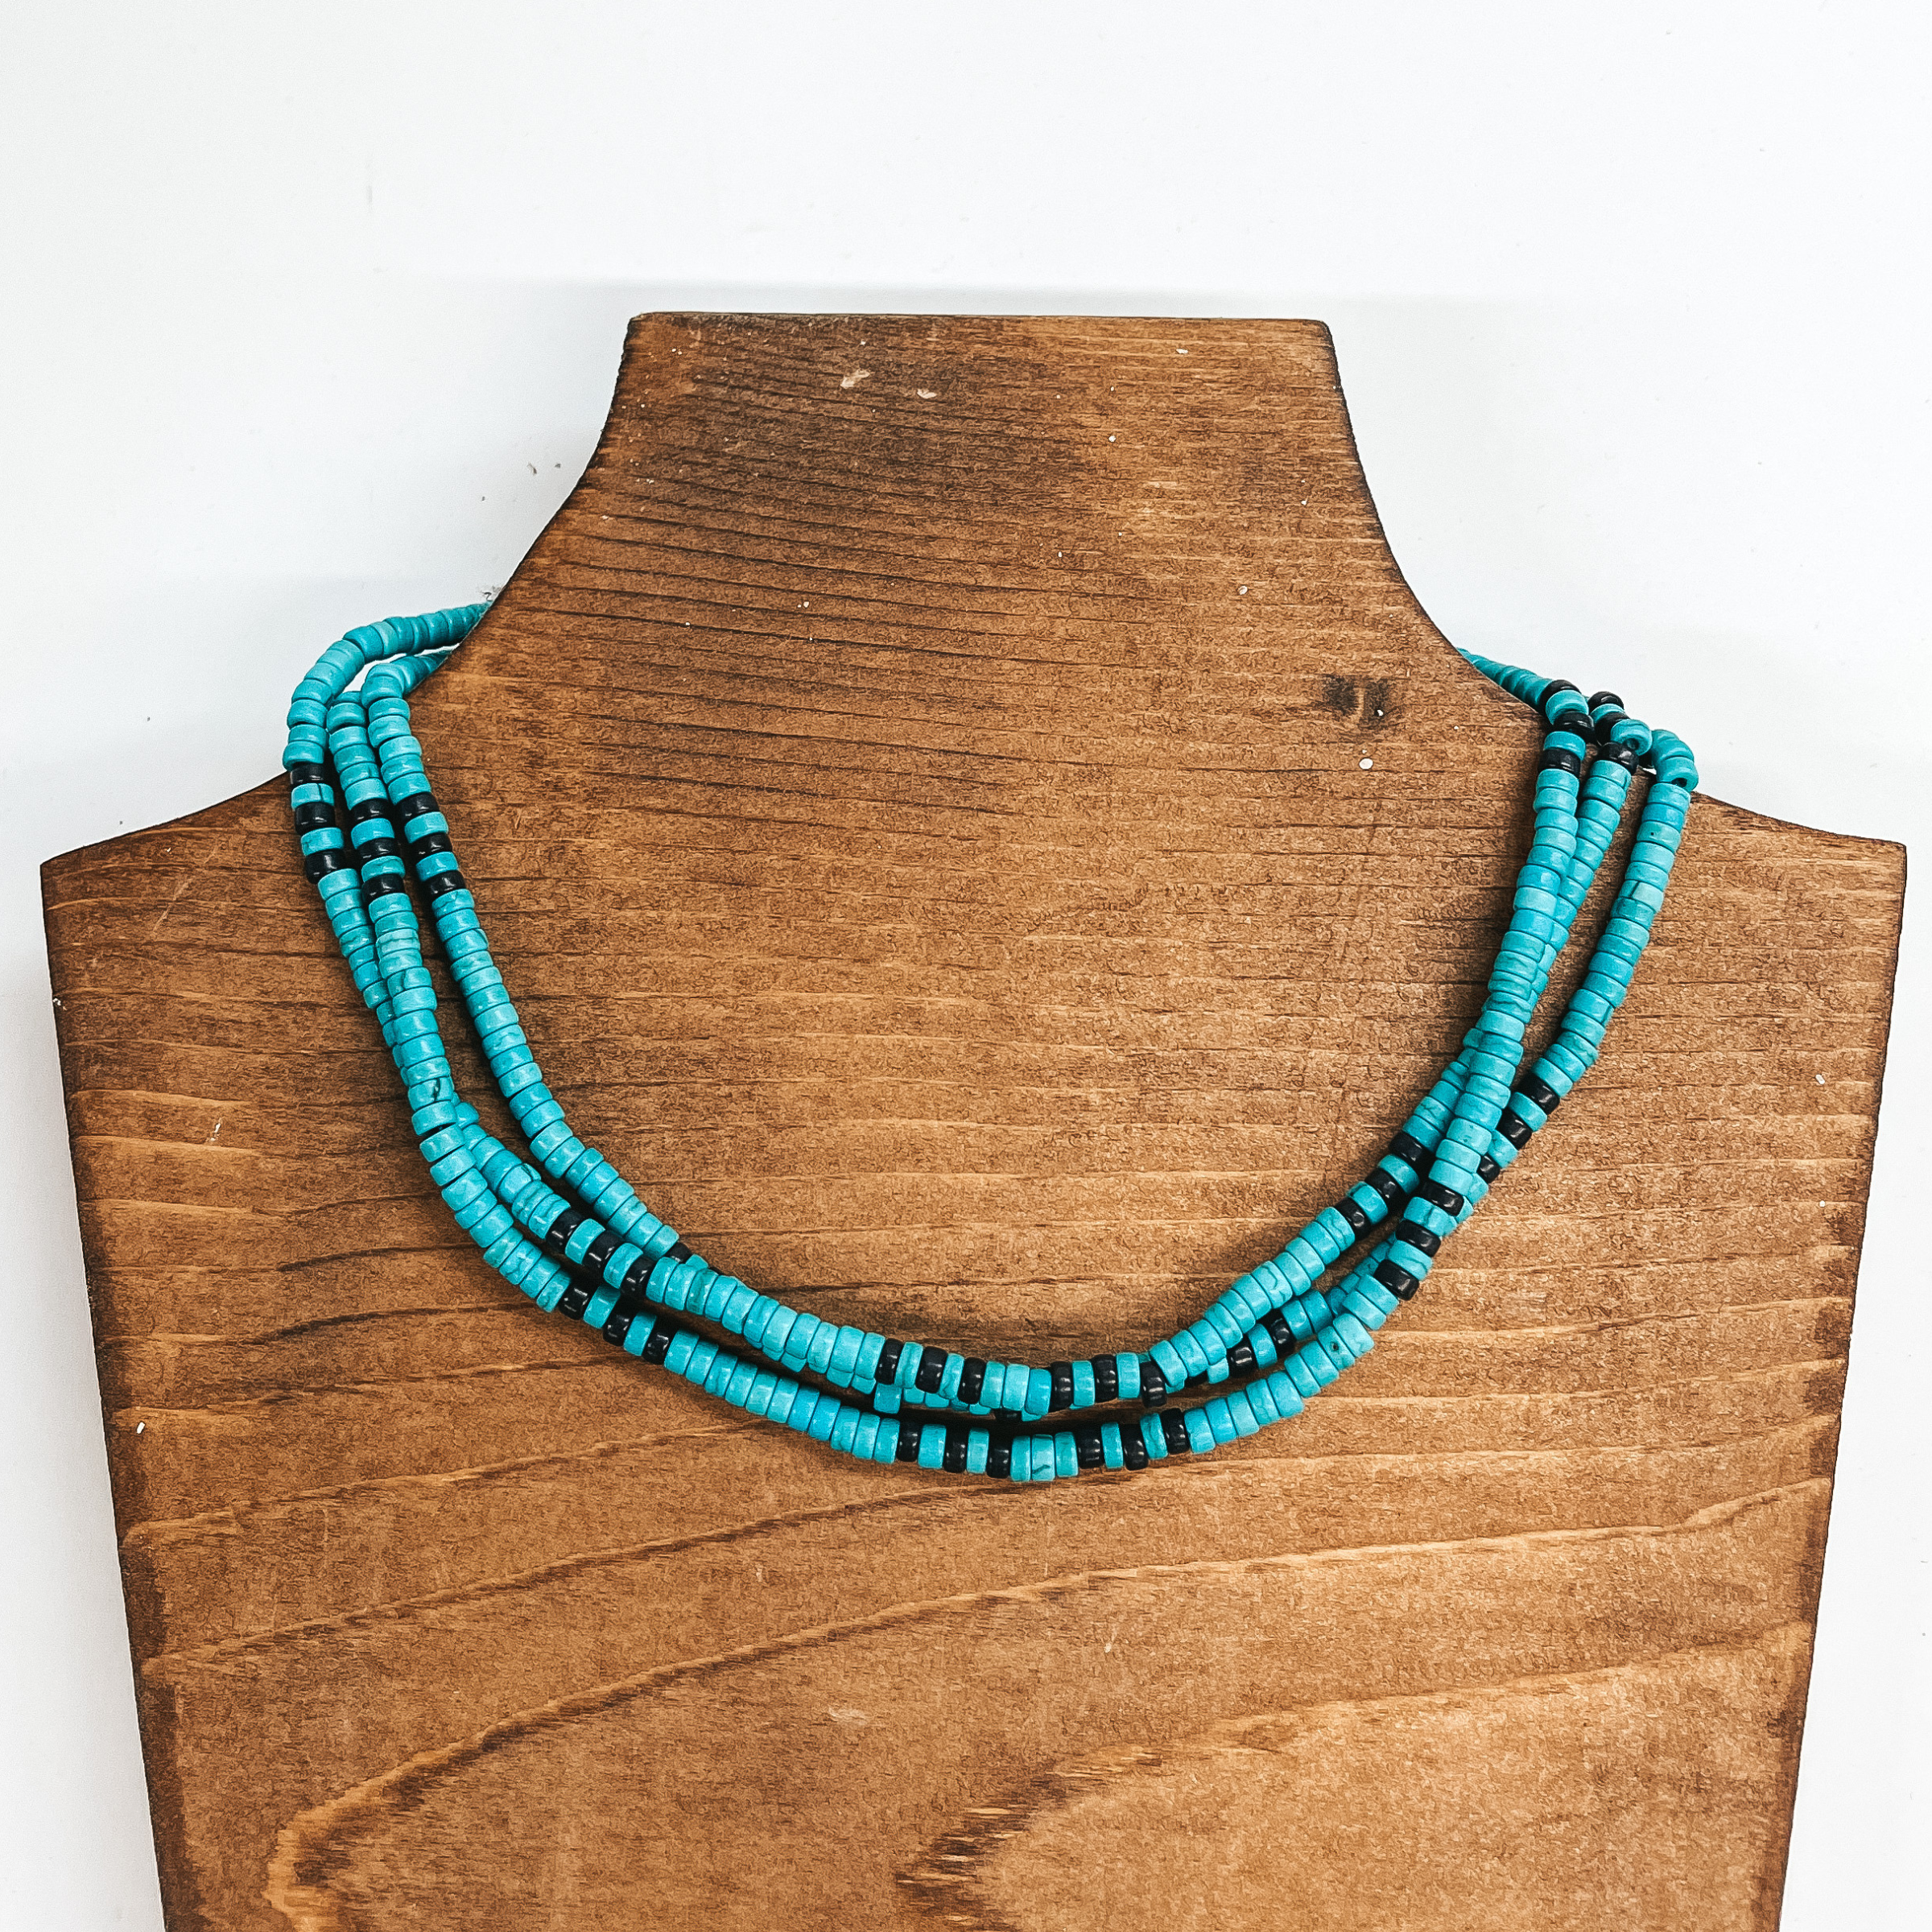 Three strand beaded choker necklace with turquoise  and black beads. The necklace is taken on a brown  block and a white background.